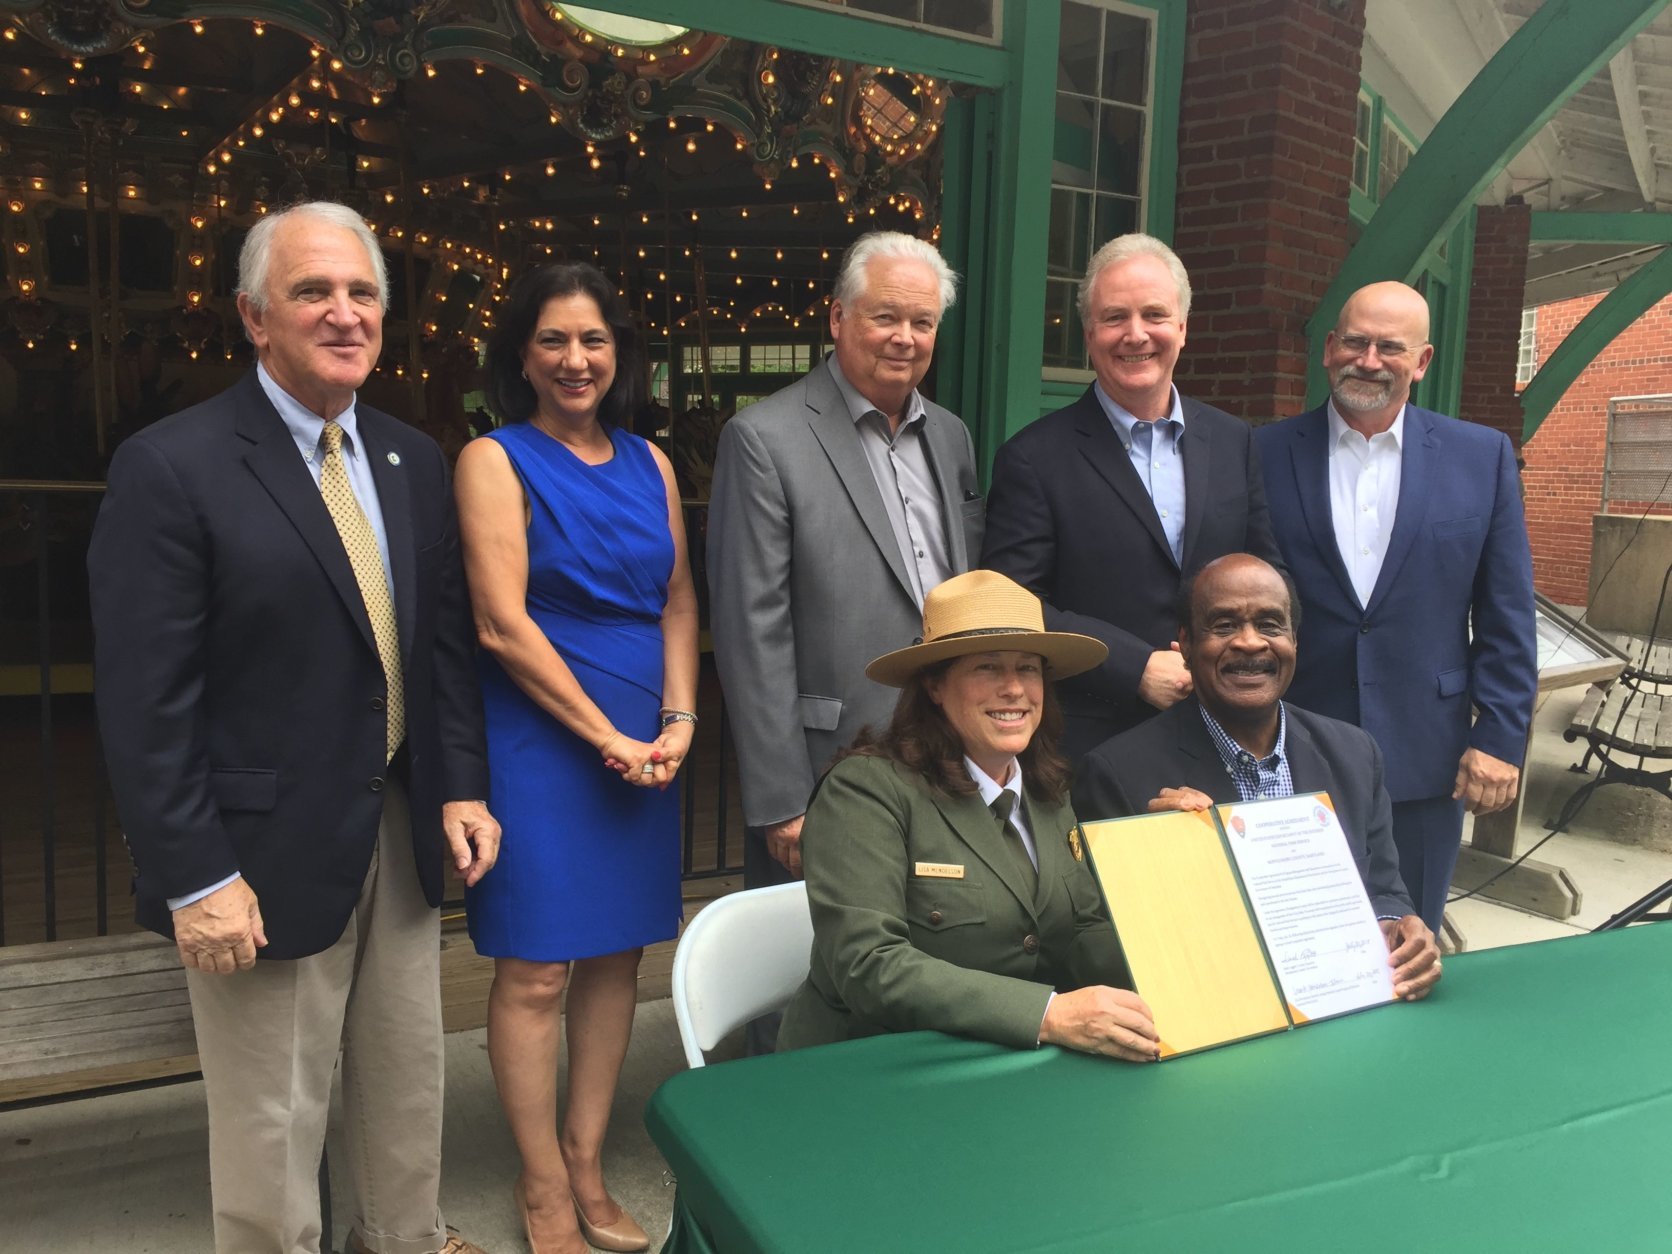 Signing the new 10-year agreement are National Park Service National Capital Regional Director Lisa Mendelson-Ielmini and Montgomery County Executive Ike Leggett. (WTOP/Kristi King)